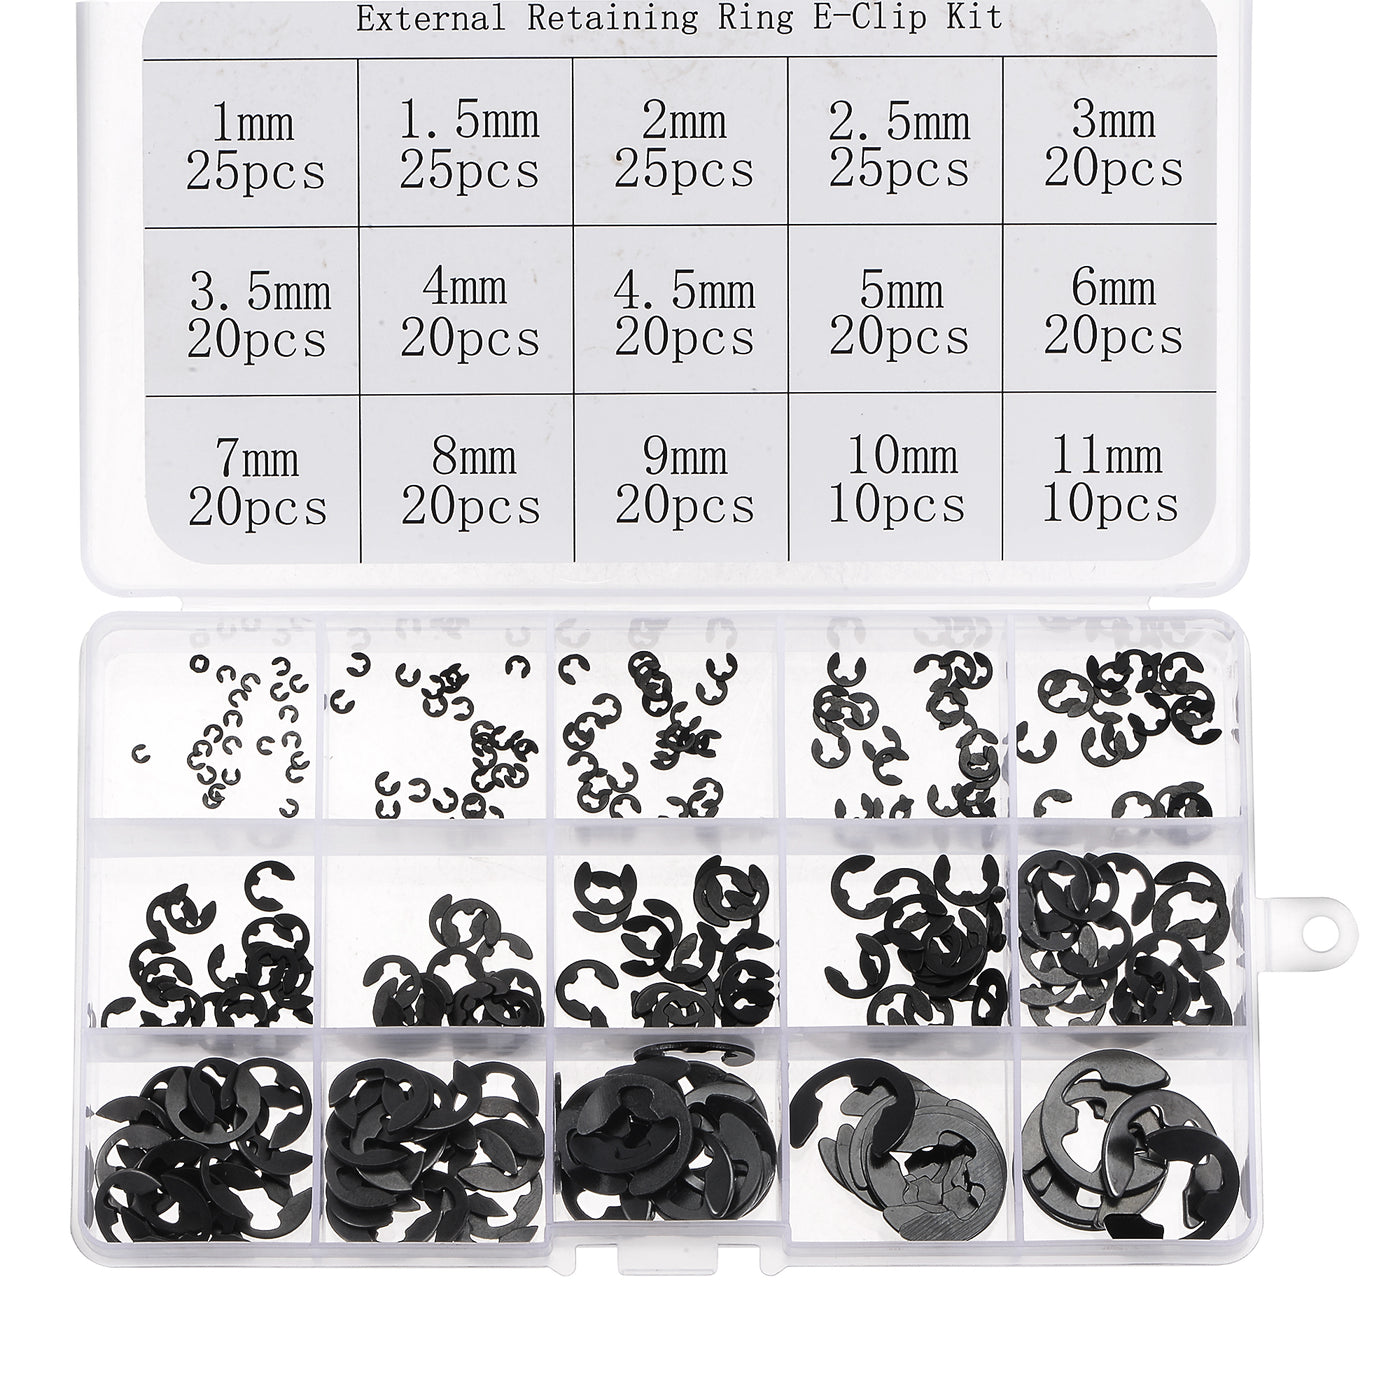 uxcell Uxcell E-Clip Circlip 300Pcs 15-Size External Retaining Shaft Ring Carbon Steel